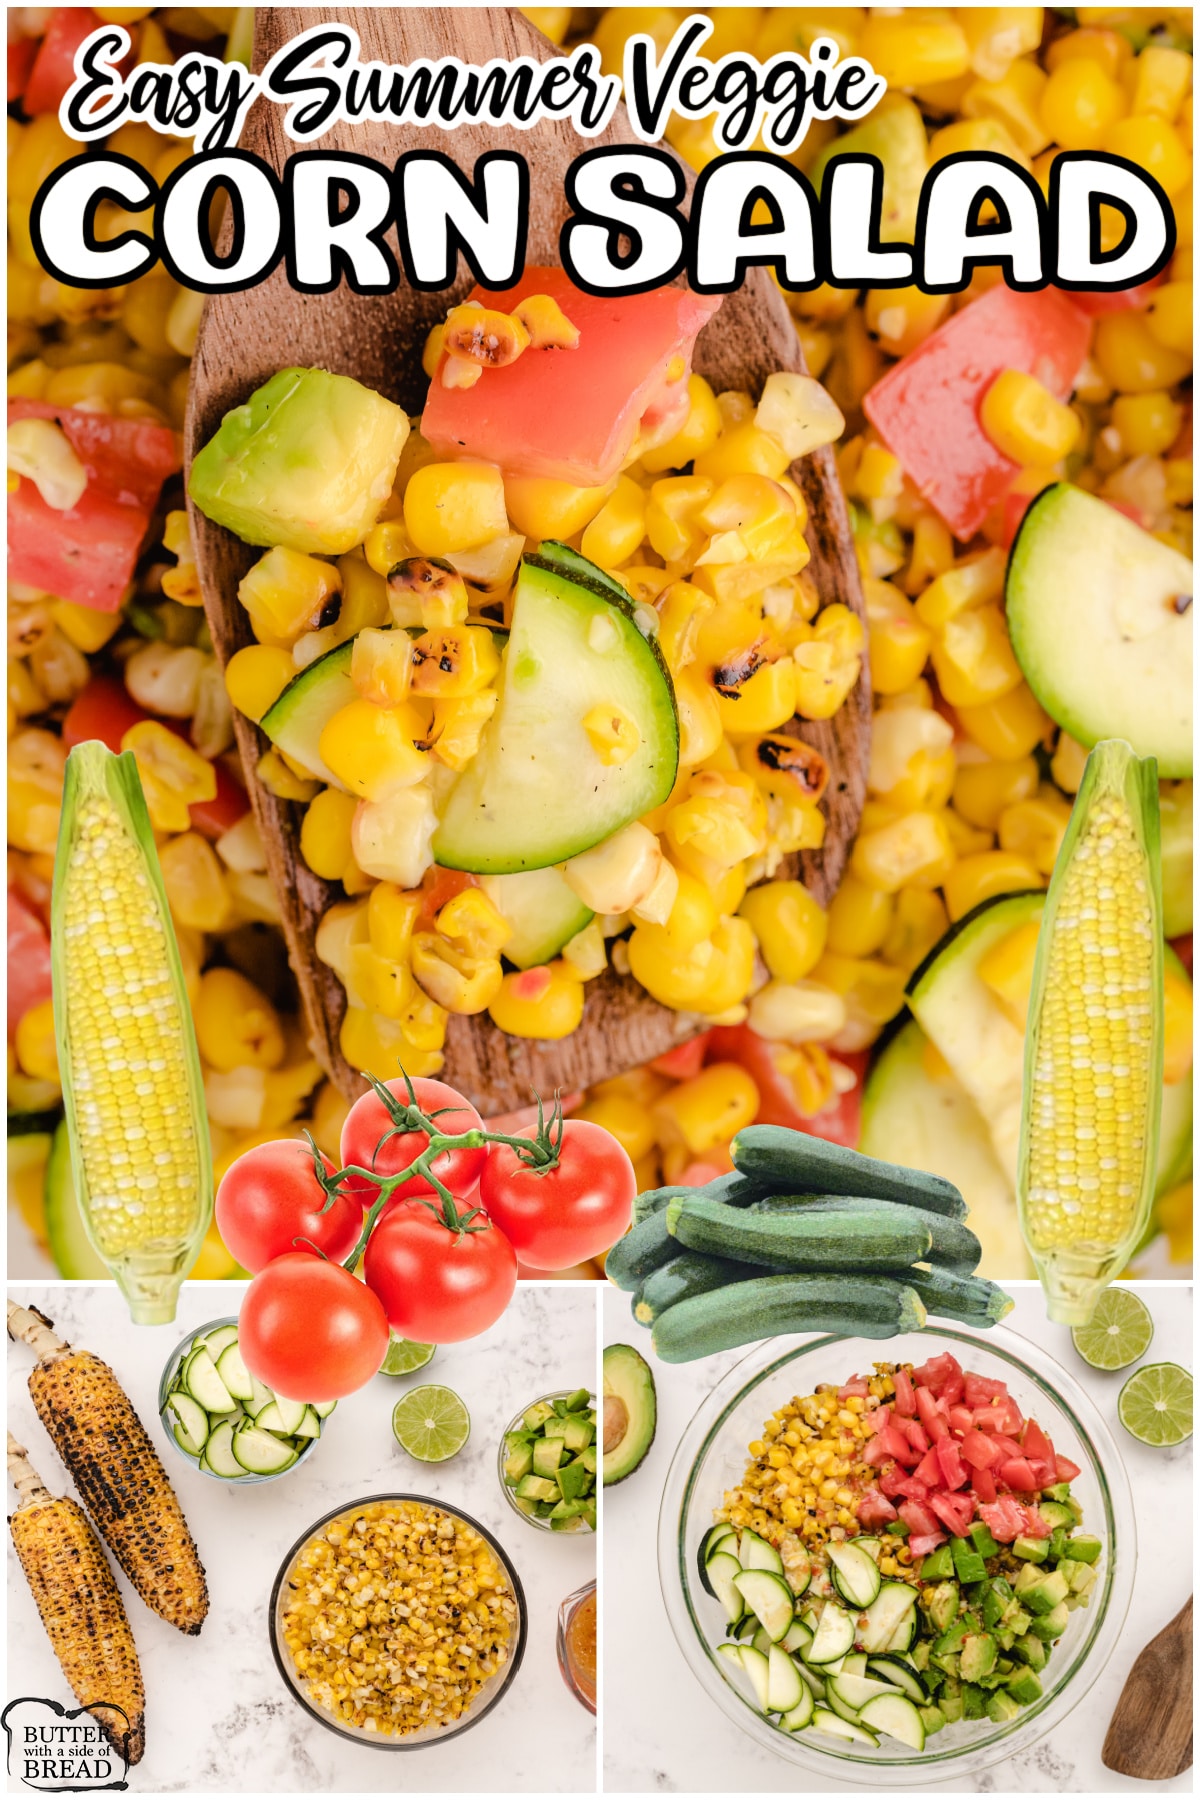 Easy Summer Corn Salad made with fresh produce & perfect for those hot summer days! This corn salad with Italian dressing is simple, yet flavorful & goes well with grilled chicken & steak.